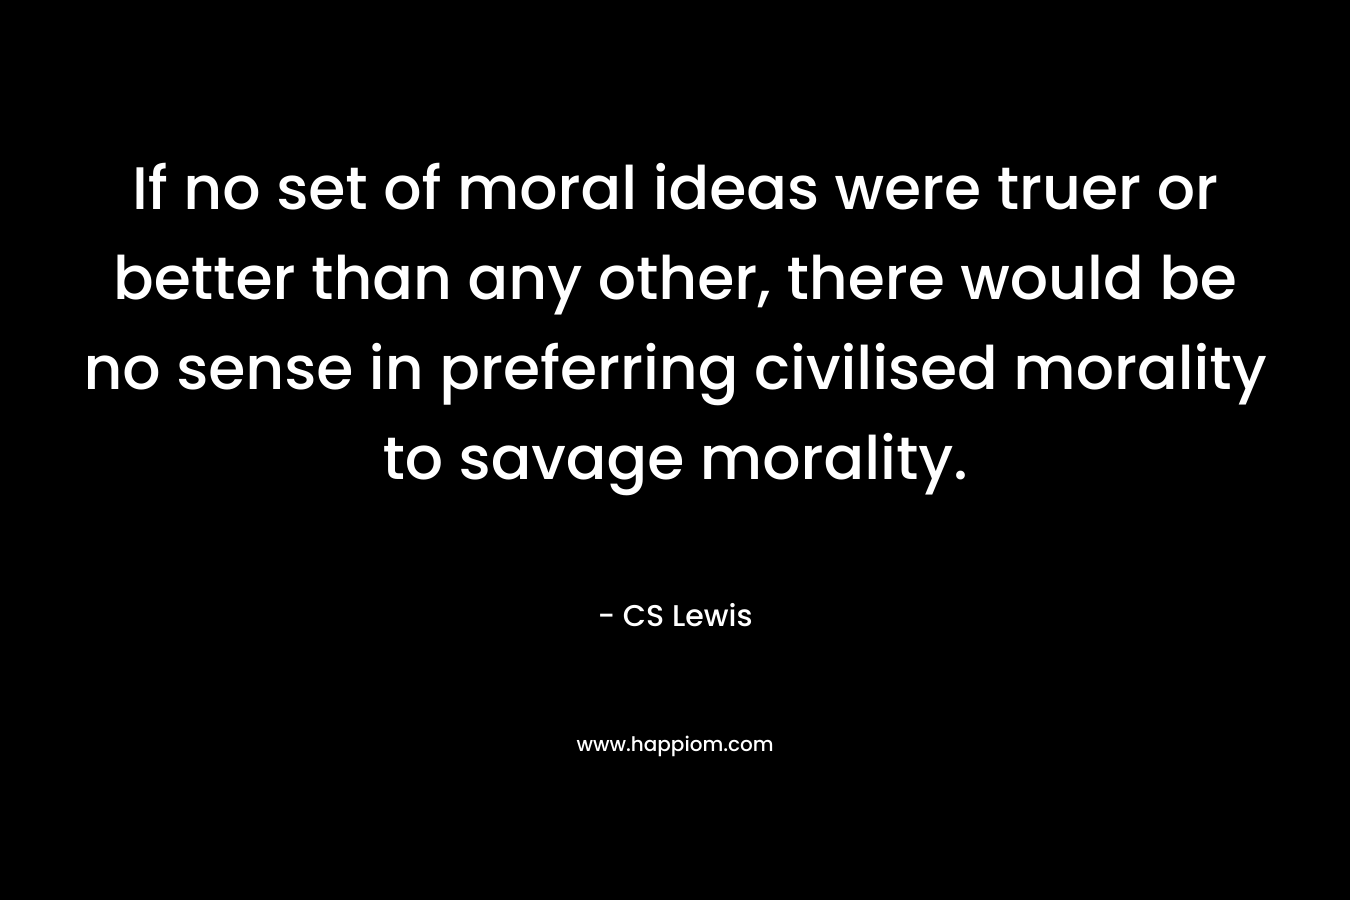 If no set of moral ideas were truer or better than any other, there would be no sense in preferring civilised morality to savage morality. – CS Lewis